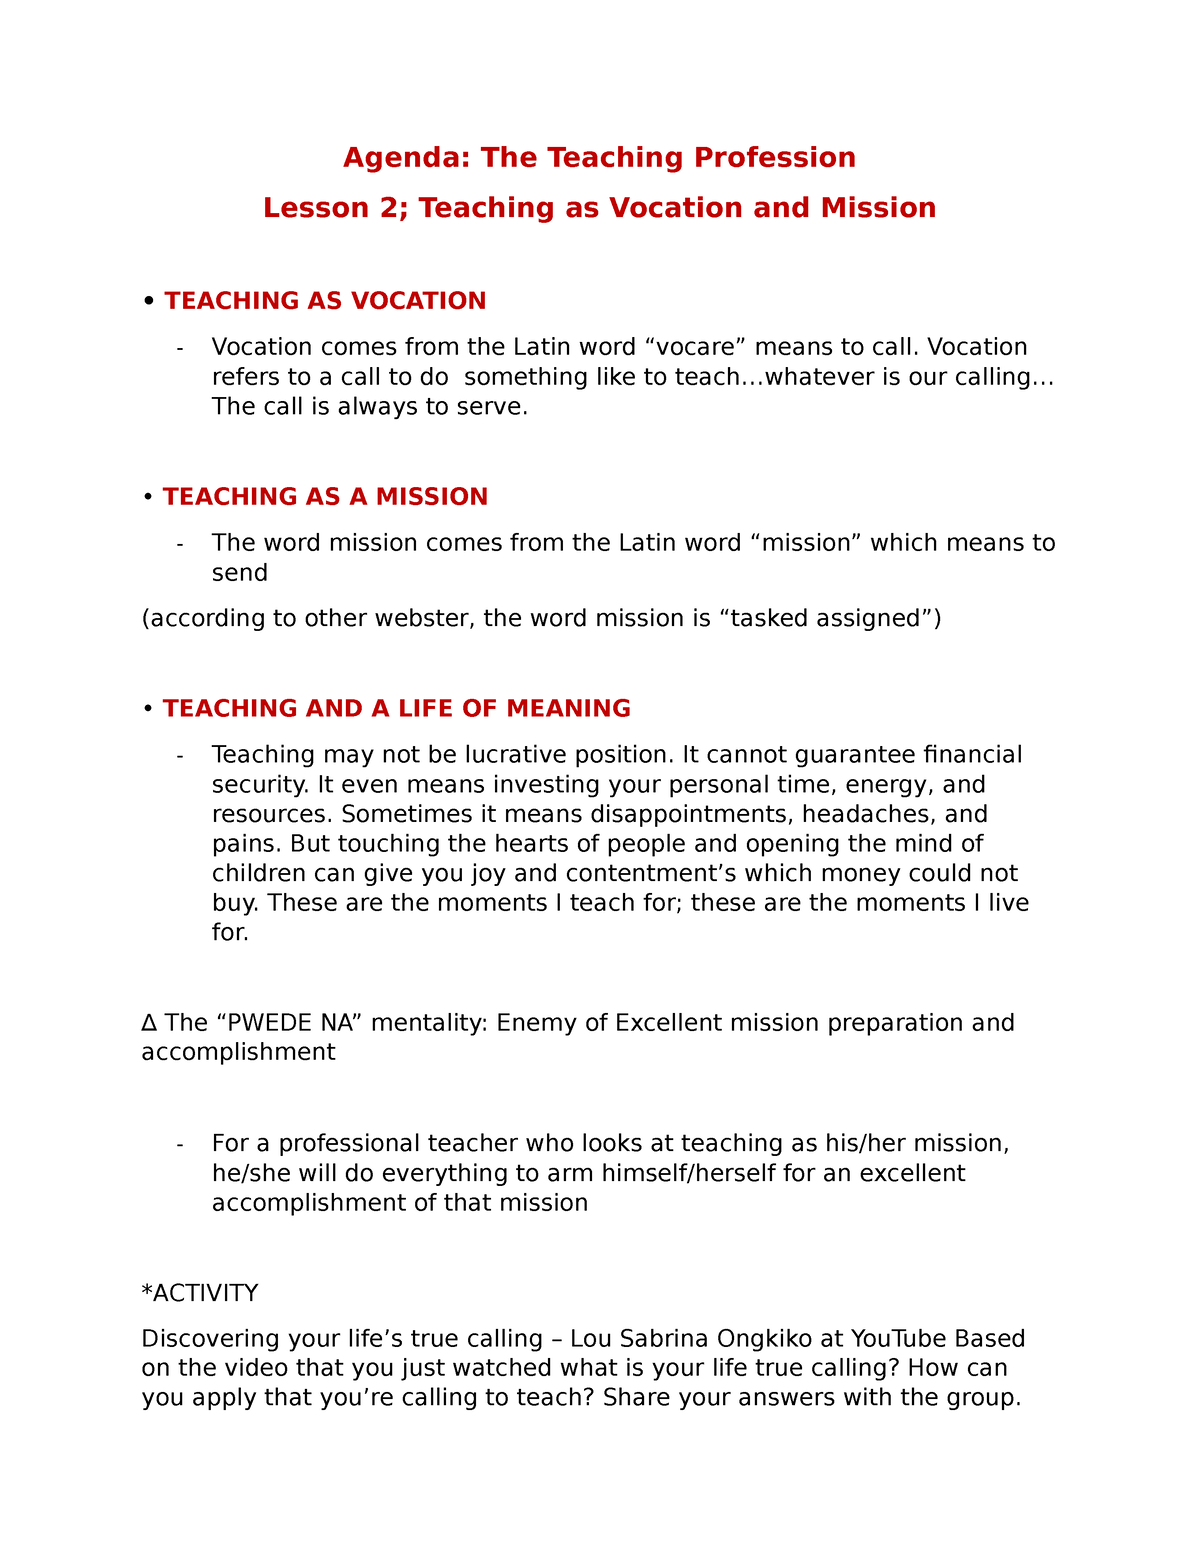 research paper about teaching as a vocation and mission